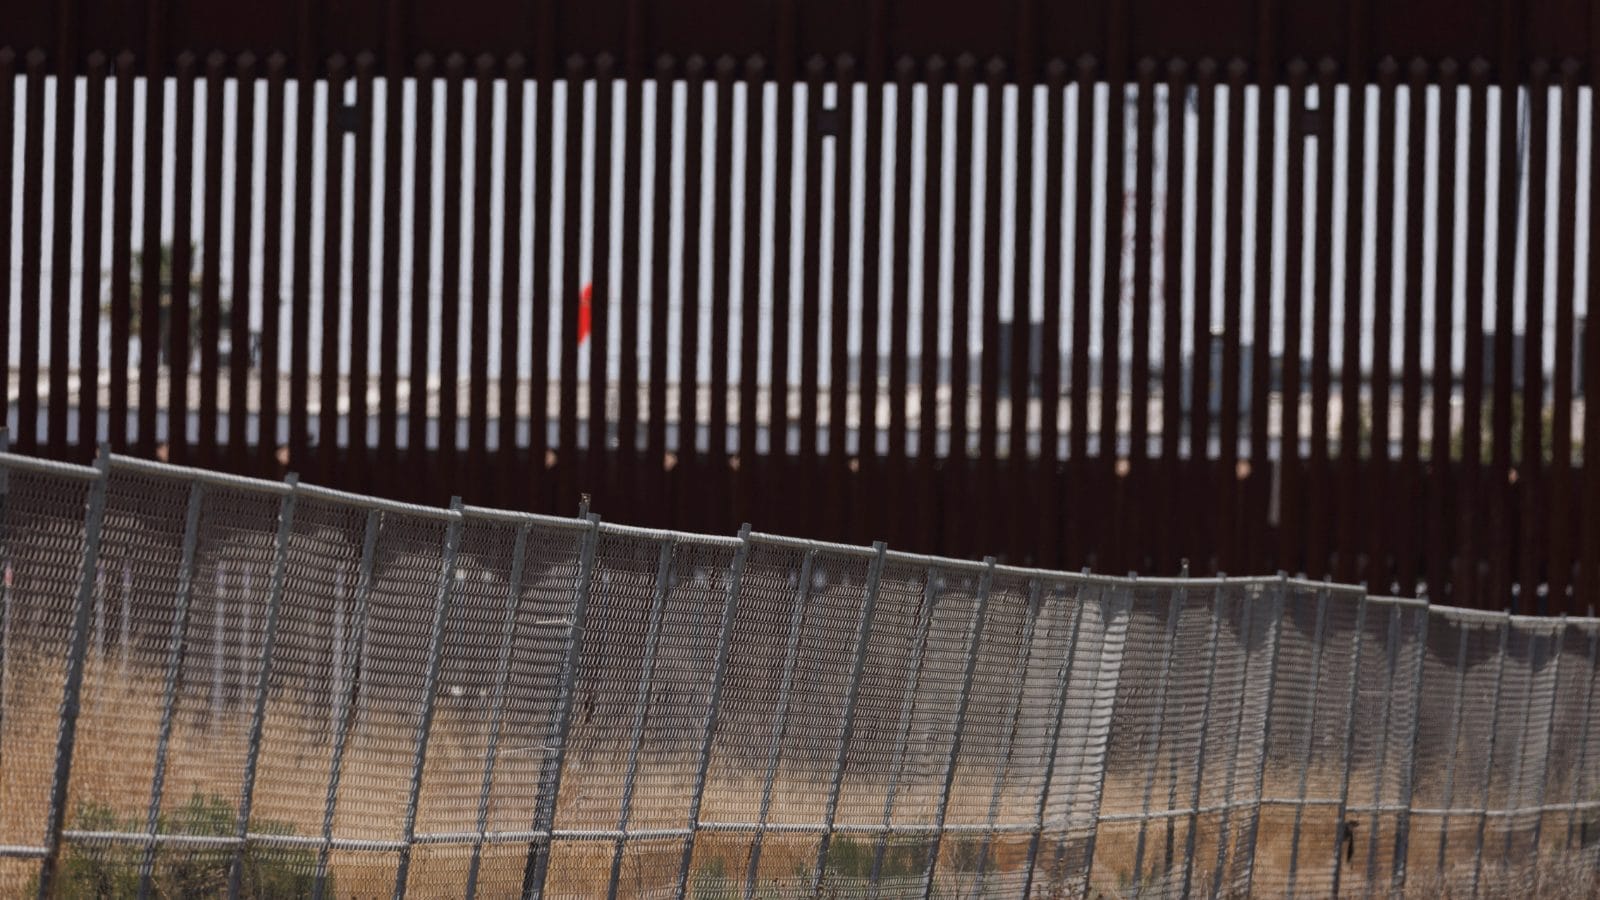 Gujarat Man Dies Scaling US Border Wall While Trying to Enter Illegally, 2 Traffickers Held